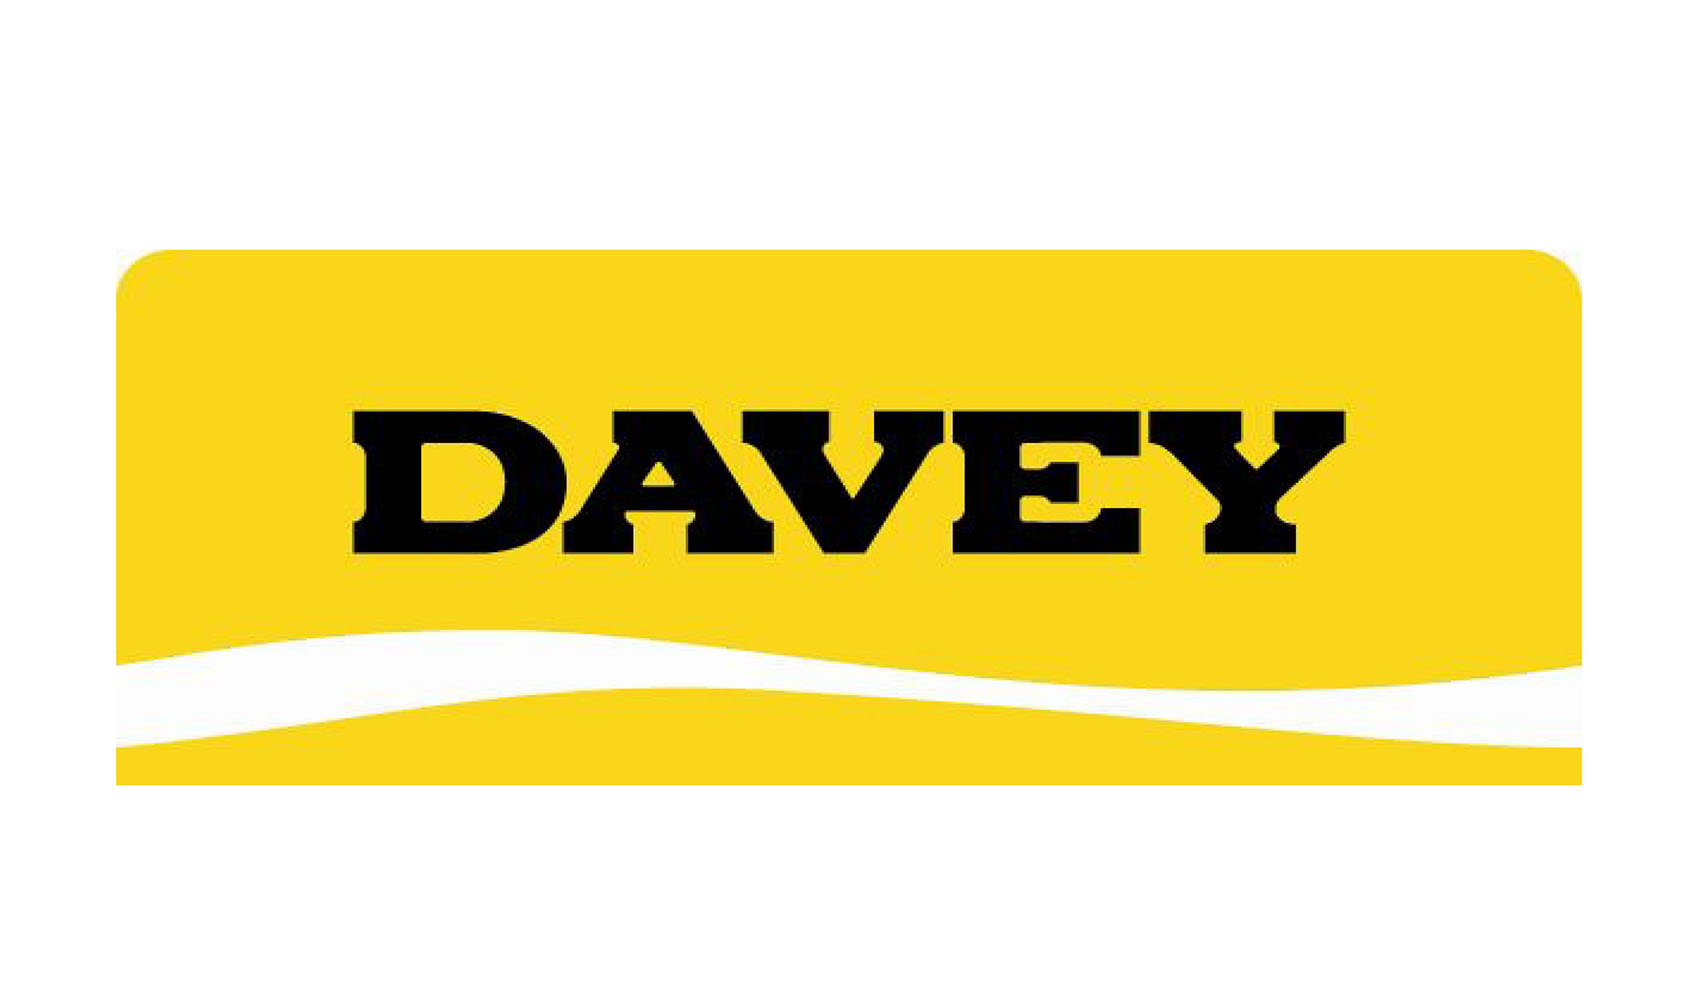 CE&CS is now an official distributor of Davey Brand